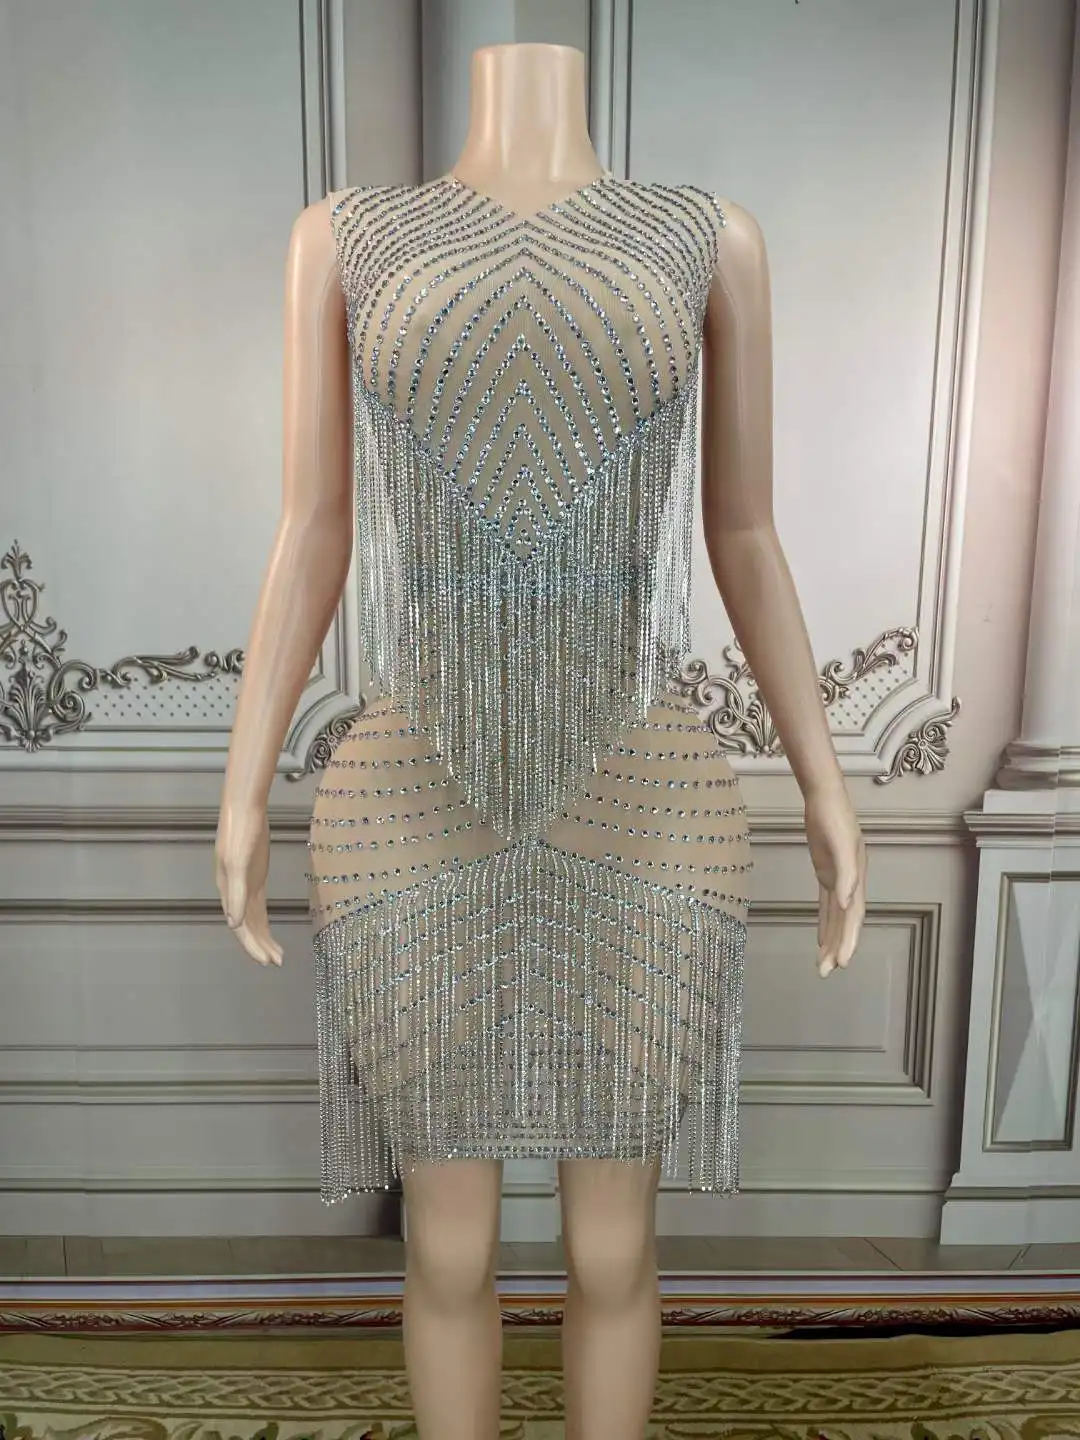 

See Through Shinning Sparkle Dress Women Fringe Rhinestone Chain Chill Party Evening Sexy Design Knee Length Drag Queen Dress